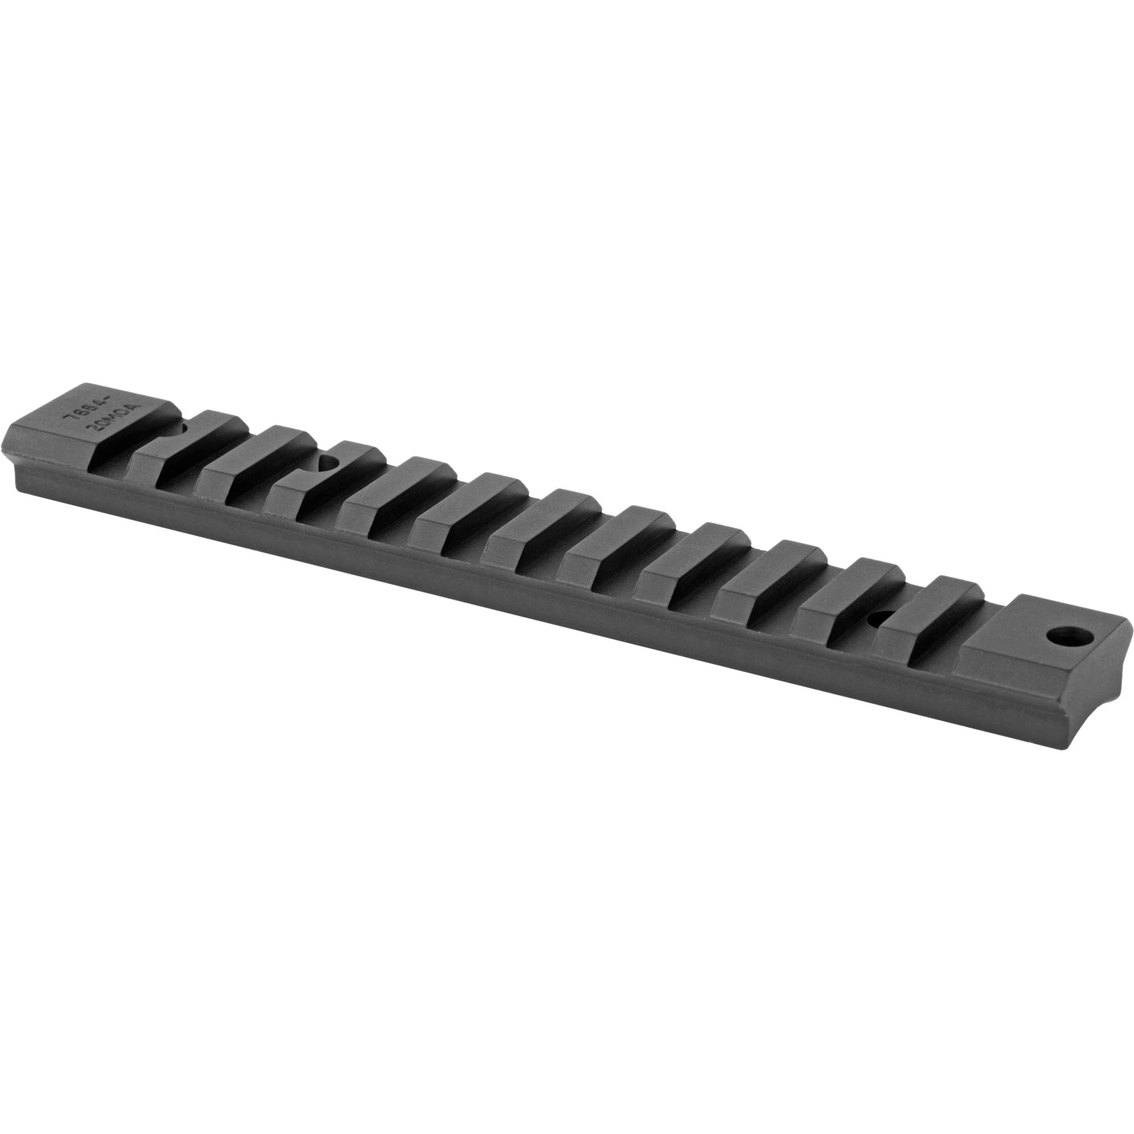 Warne Scope Mounts XP Tactical 1 pc. Base, fits Ruger CF SA 20MOA Incline, Matte - Image 2 of 2